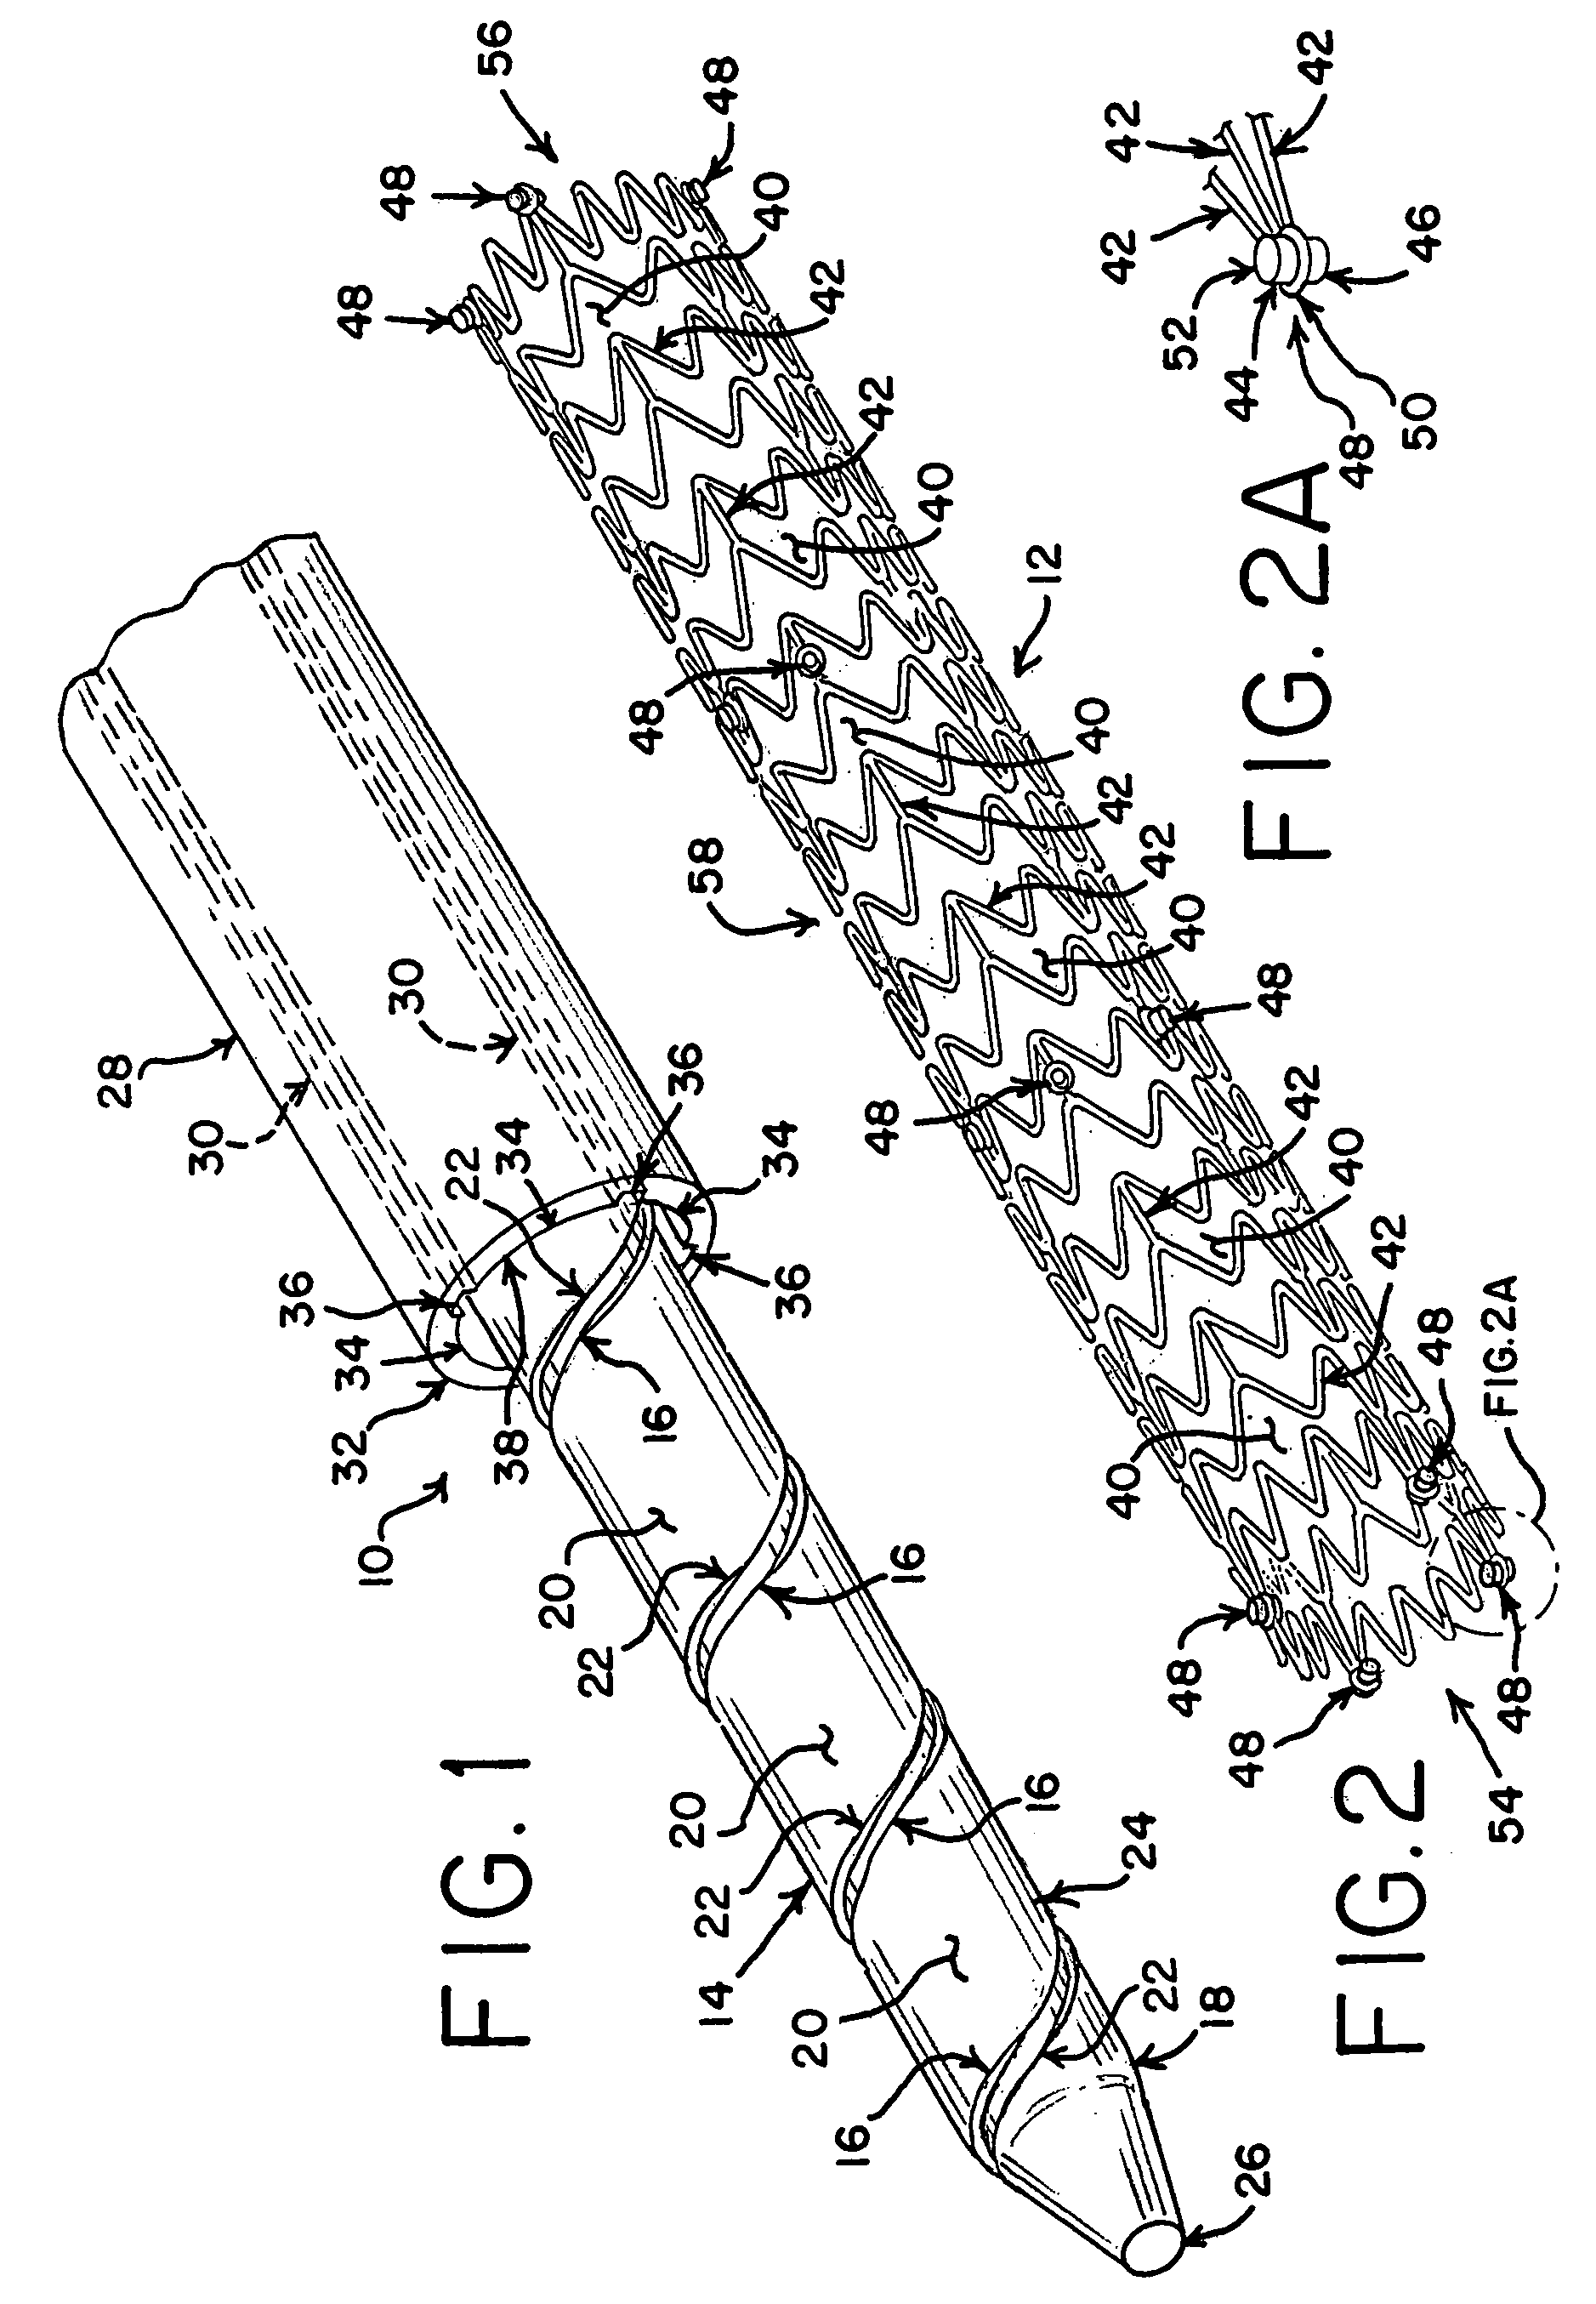 Delivery system with helical shaft